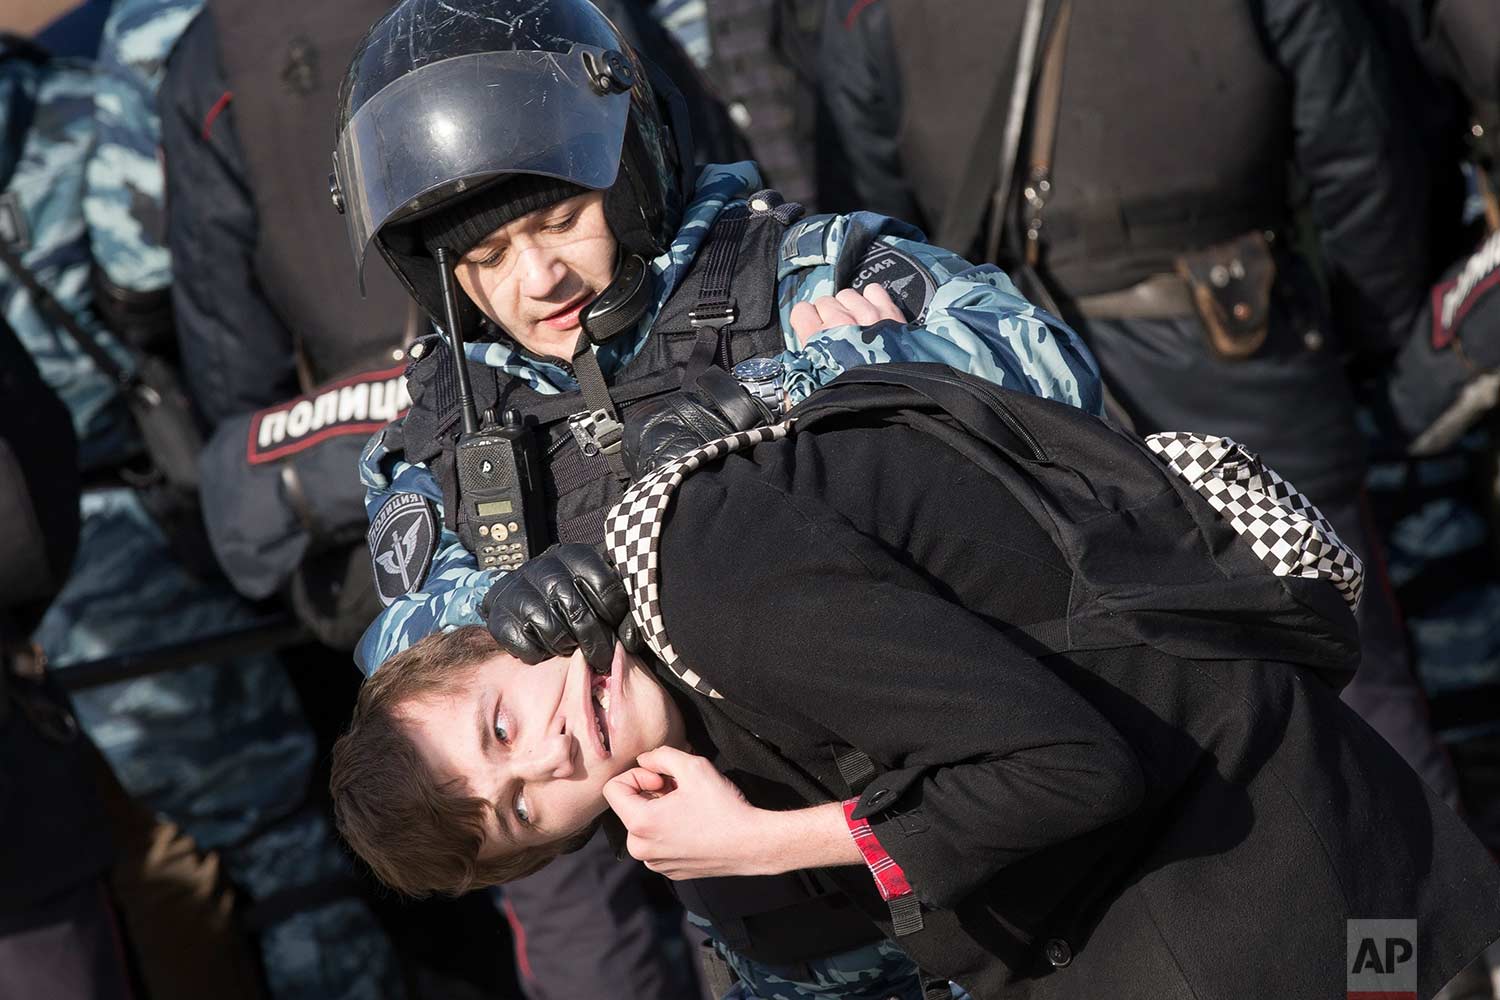  In this Sunday, March 26, 2017 photo, police detain a protester in downtown Moscow, Russia. Thousands of people crowded into Moscow's Pushkin Square on Sunday for an unsanctioned protest against the Russian government, the biggest gathering in a wav